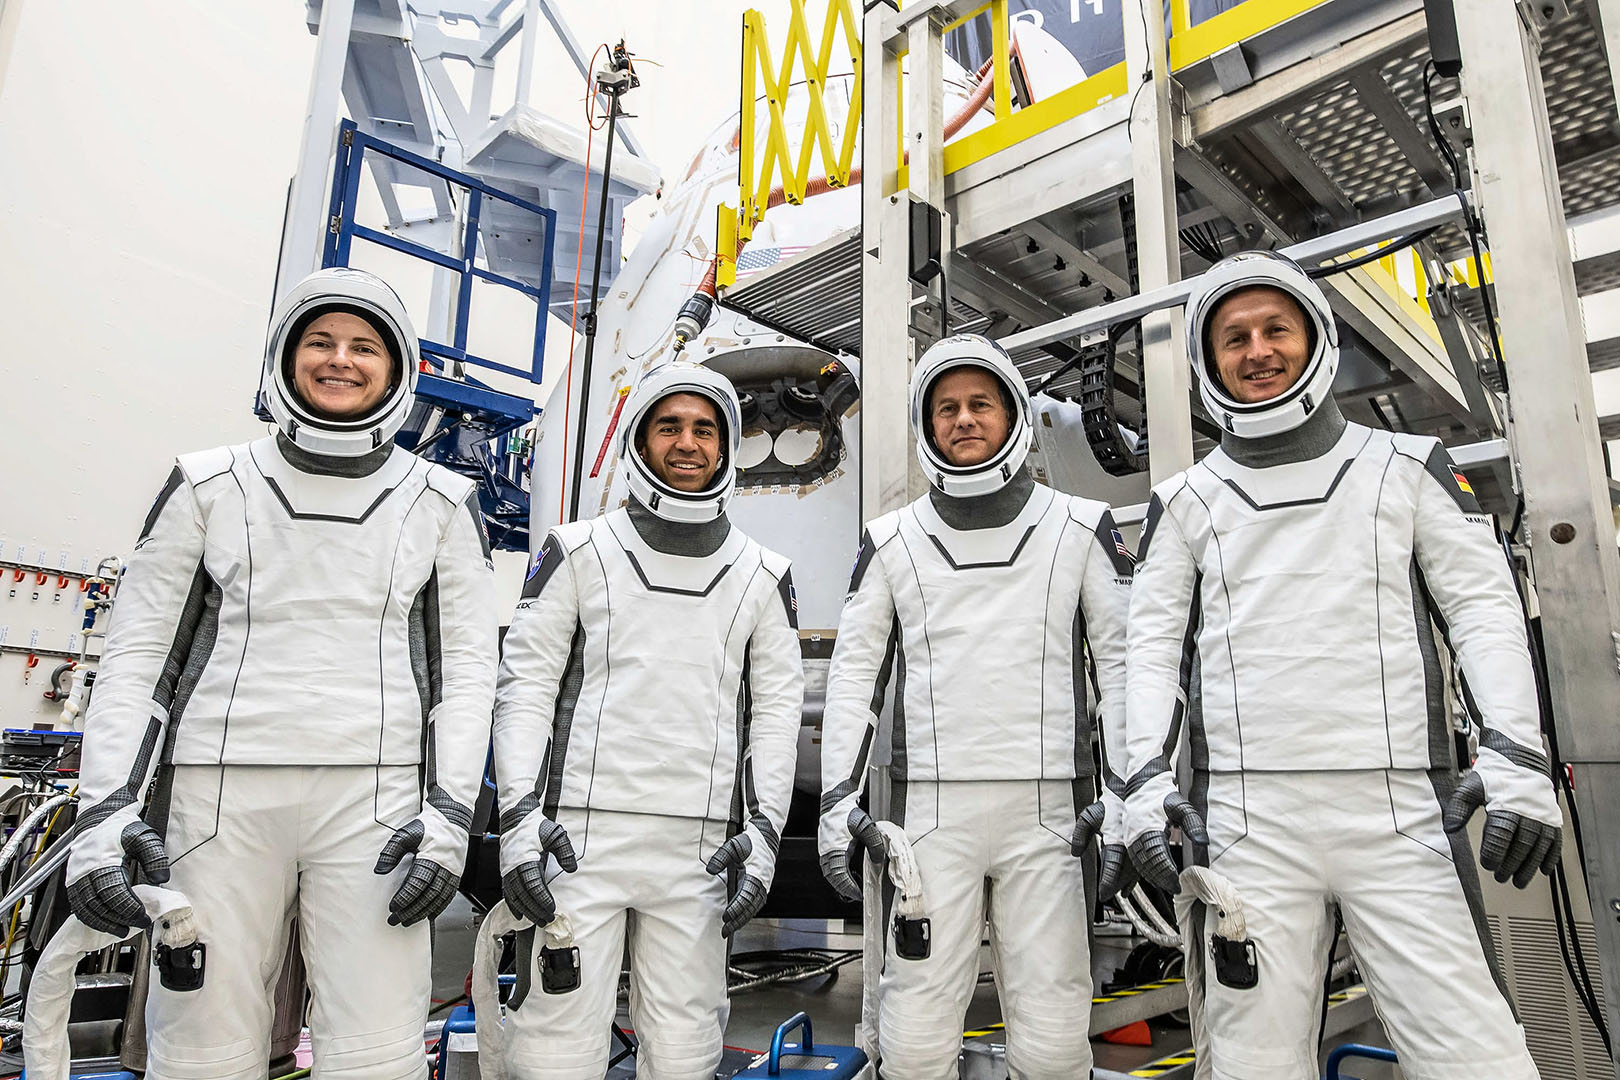 The Crew-3 astronauts in their white SpaceX spacesuits.